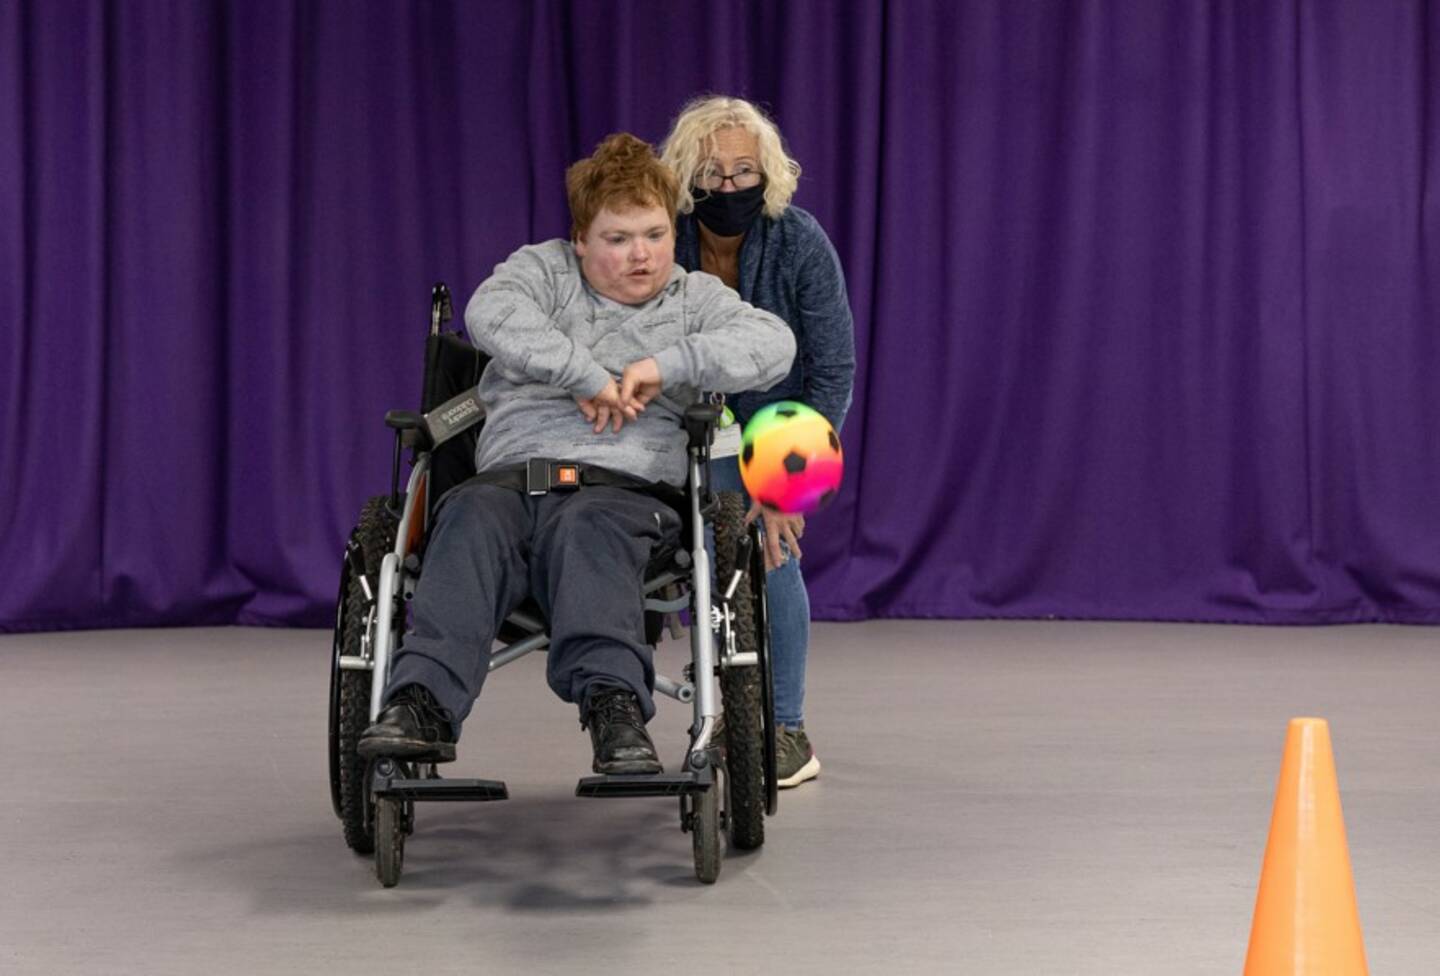 A man using a wheelchair propelling a multi-coloured ball with his hands, as a woman encourages close by.